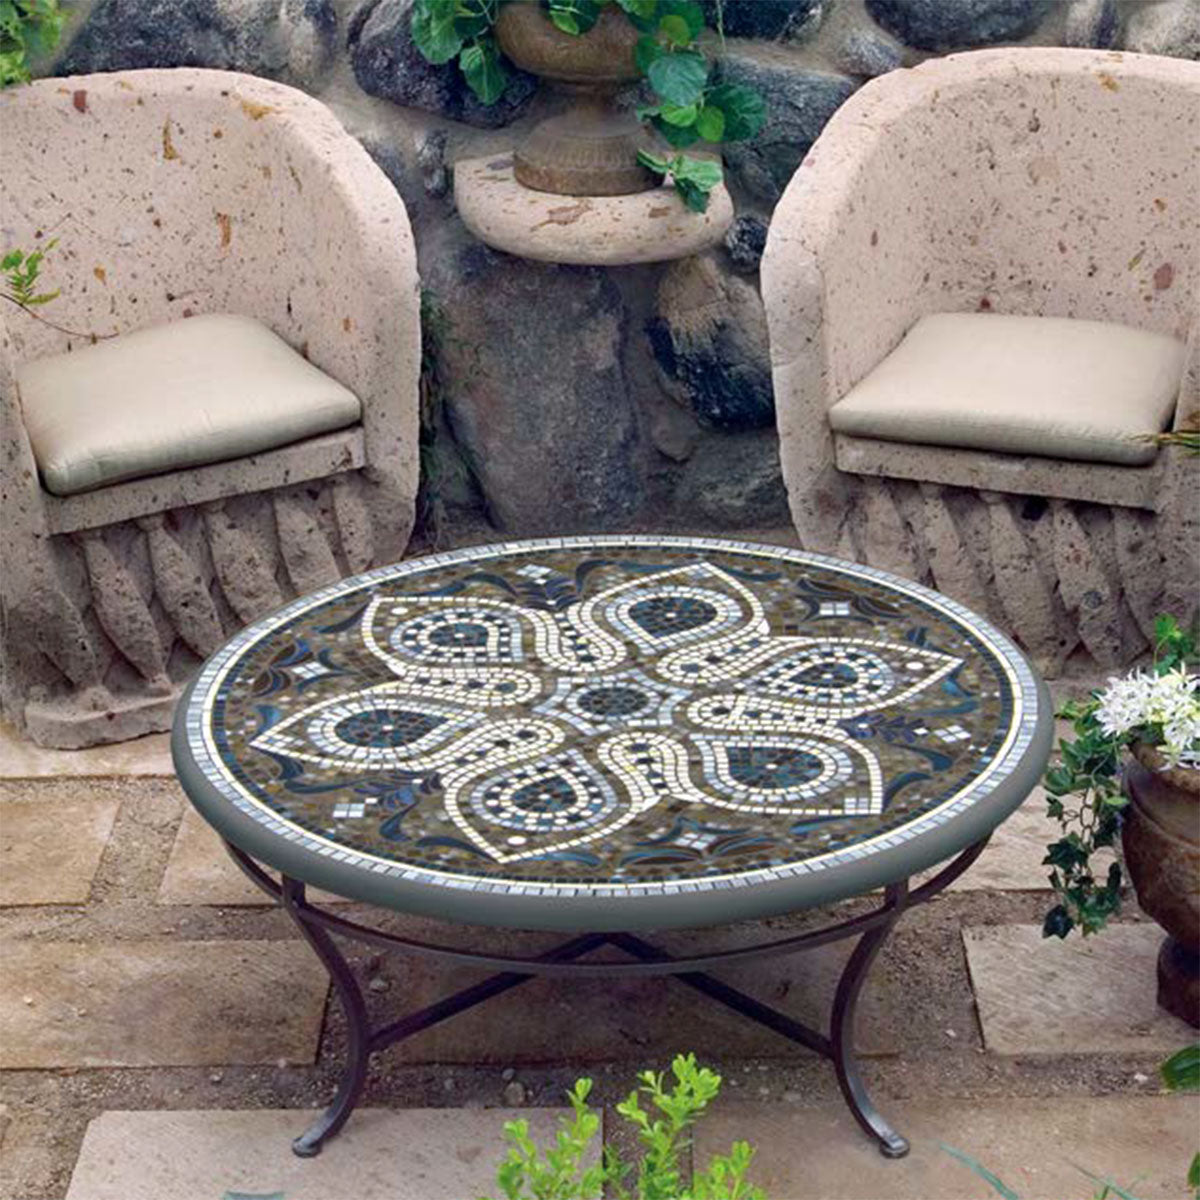 Mosaic Coffee Tables - Round-Iron Accents